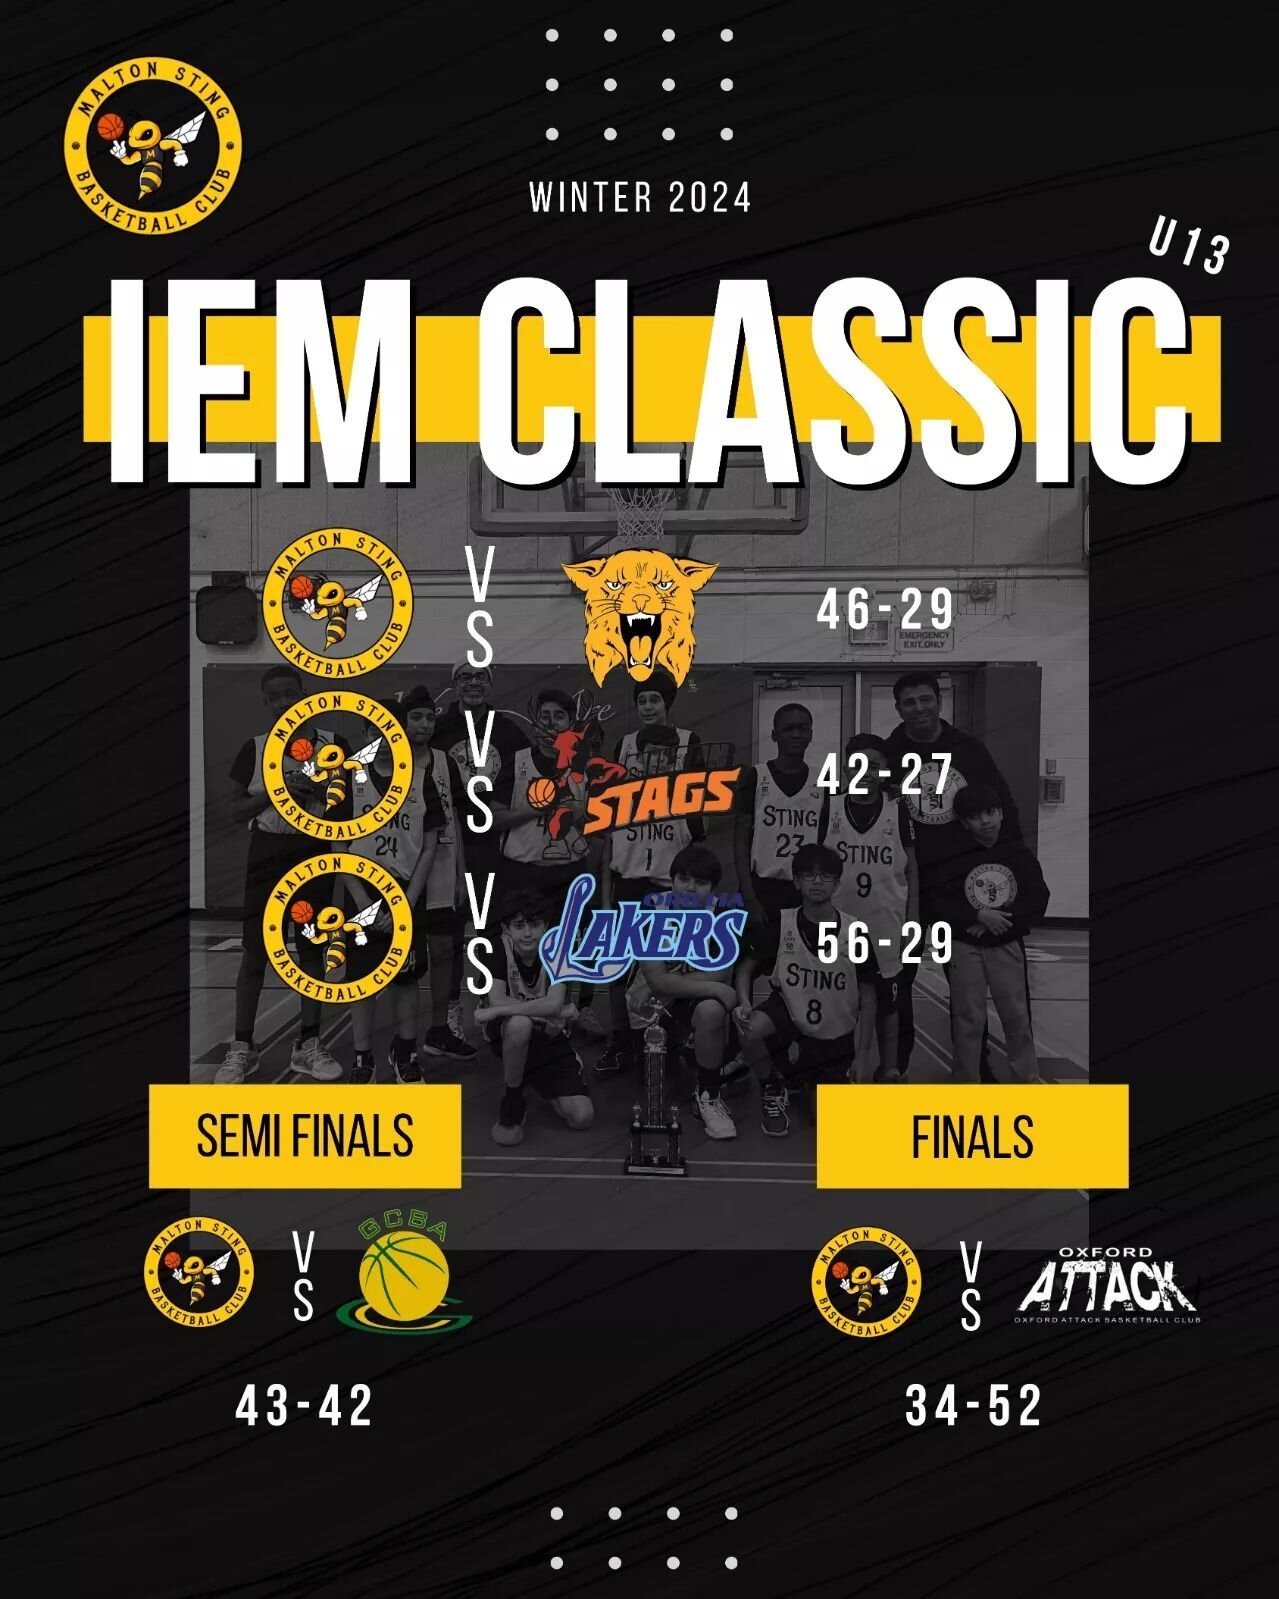 Congratulations to our U13 team who took part in the IEM Classic over the weekend, coming 2nd overall out of 56 teams! They battled teams in the semis and finals several divisions ahead of them and brought home their first trophy of the 23/24 season 